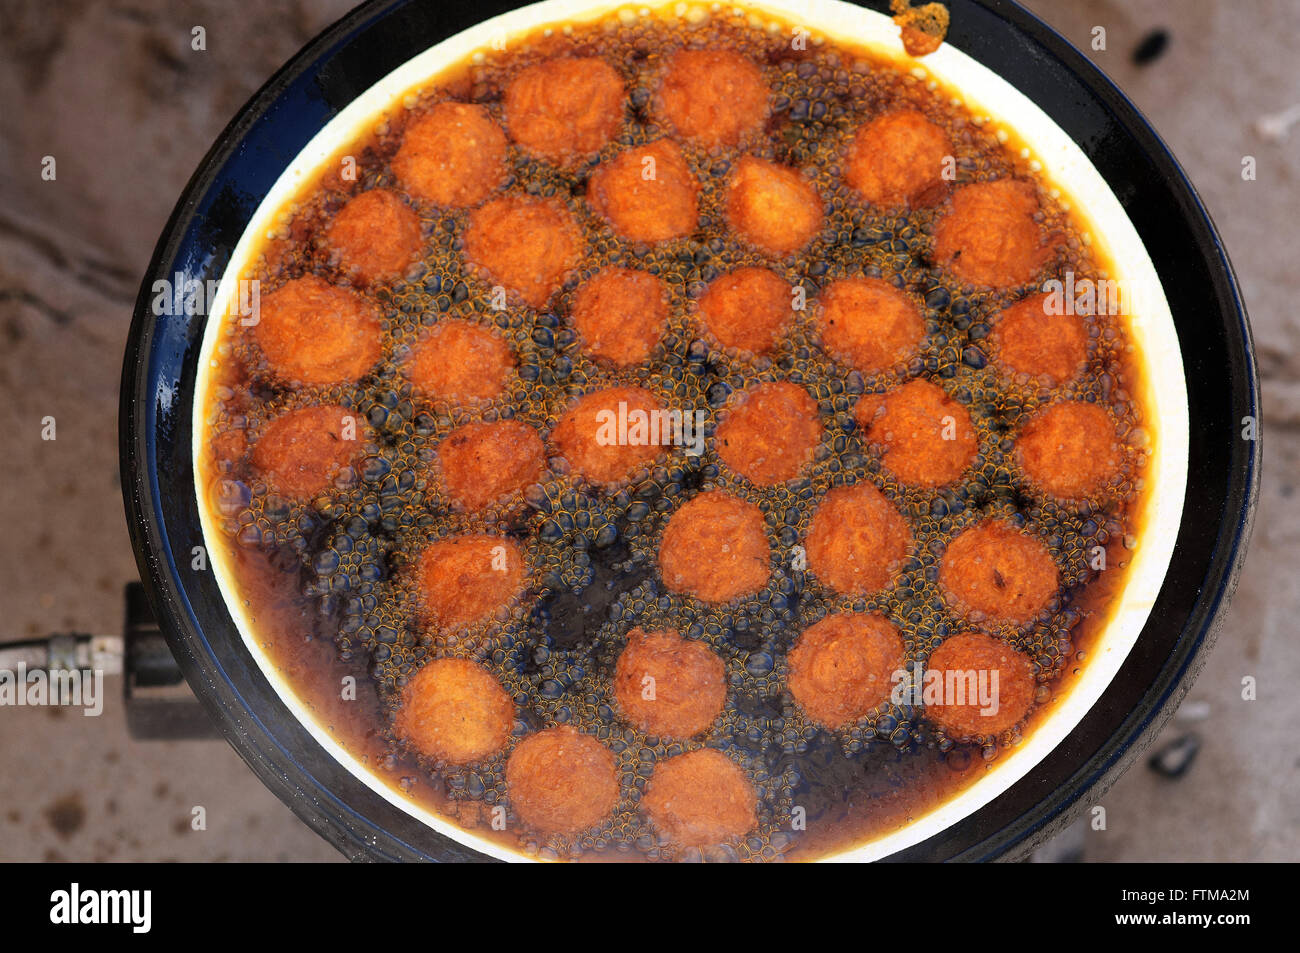 Acaraje being fried Stock Photo